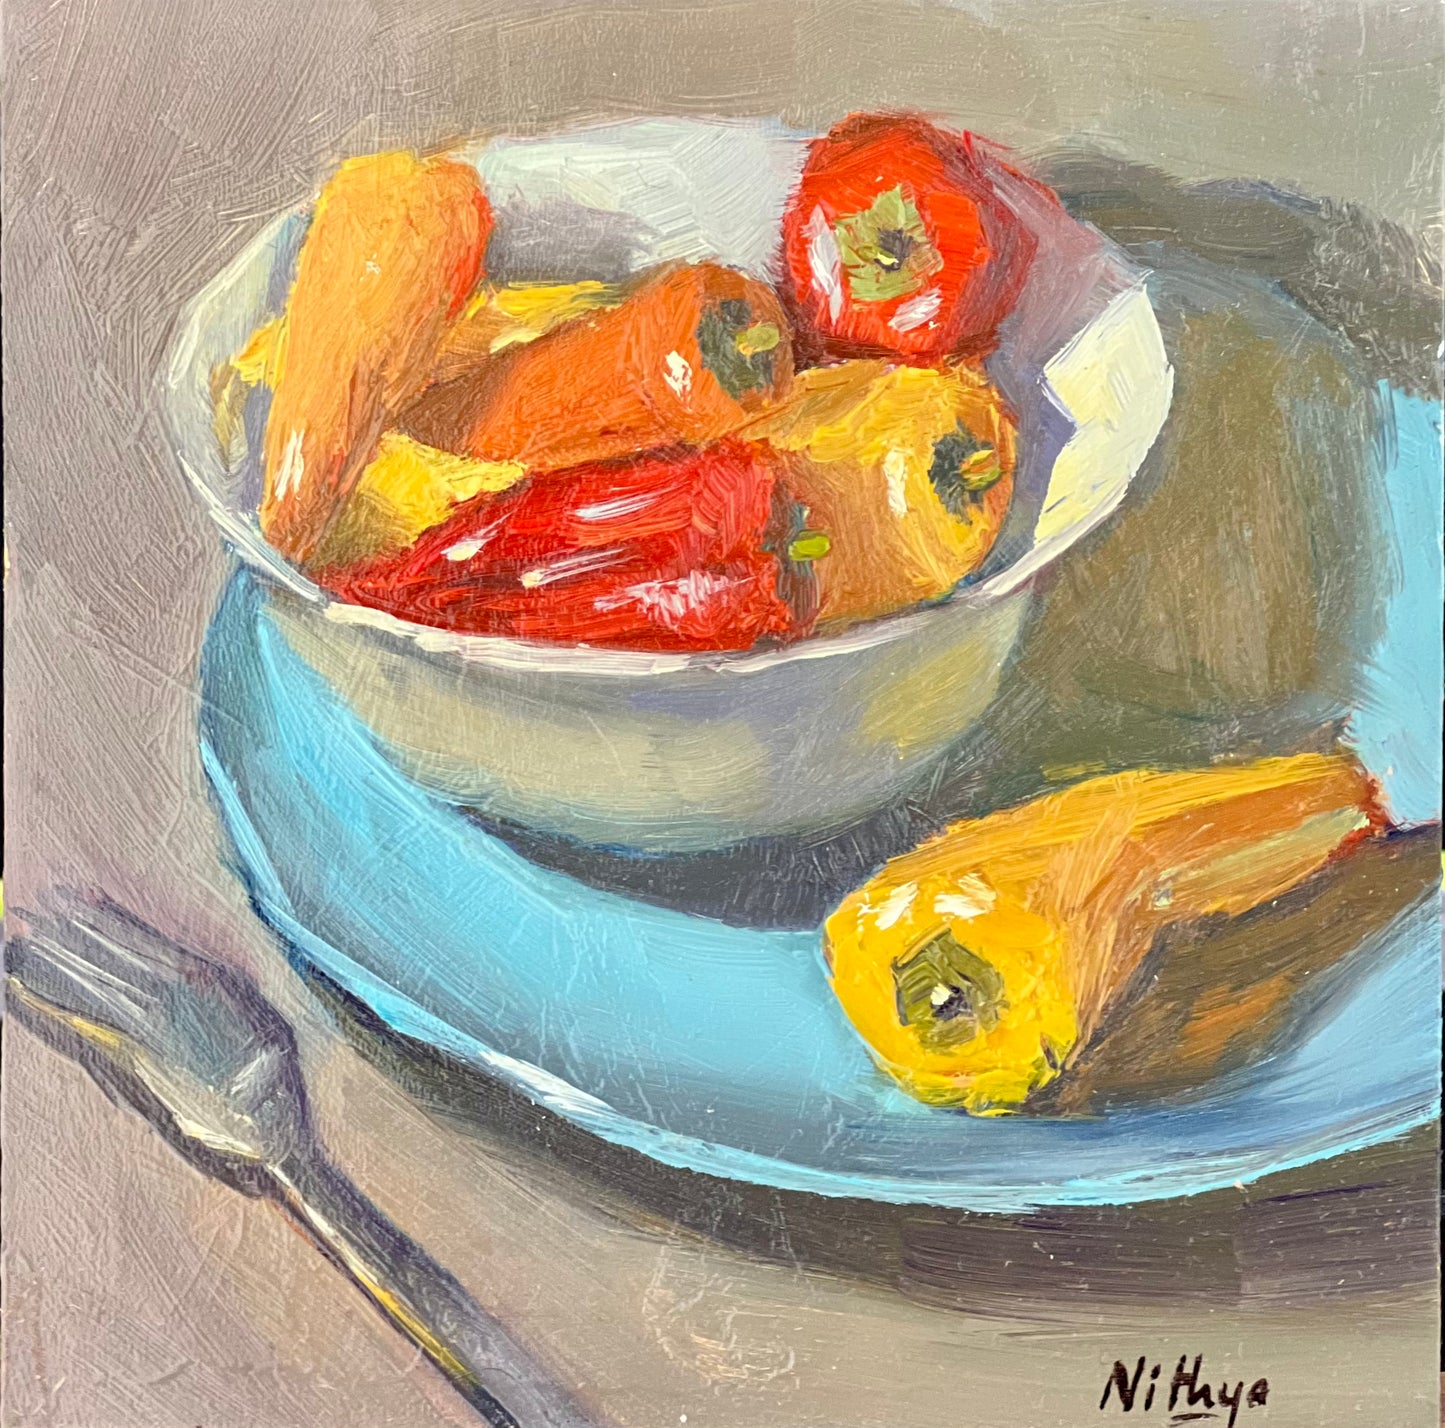 Small Painting - Red and Yellow Peppers in a Bowl